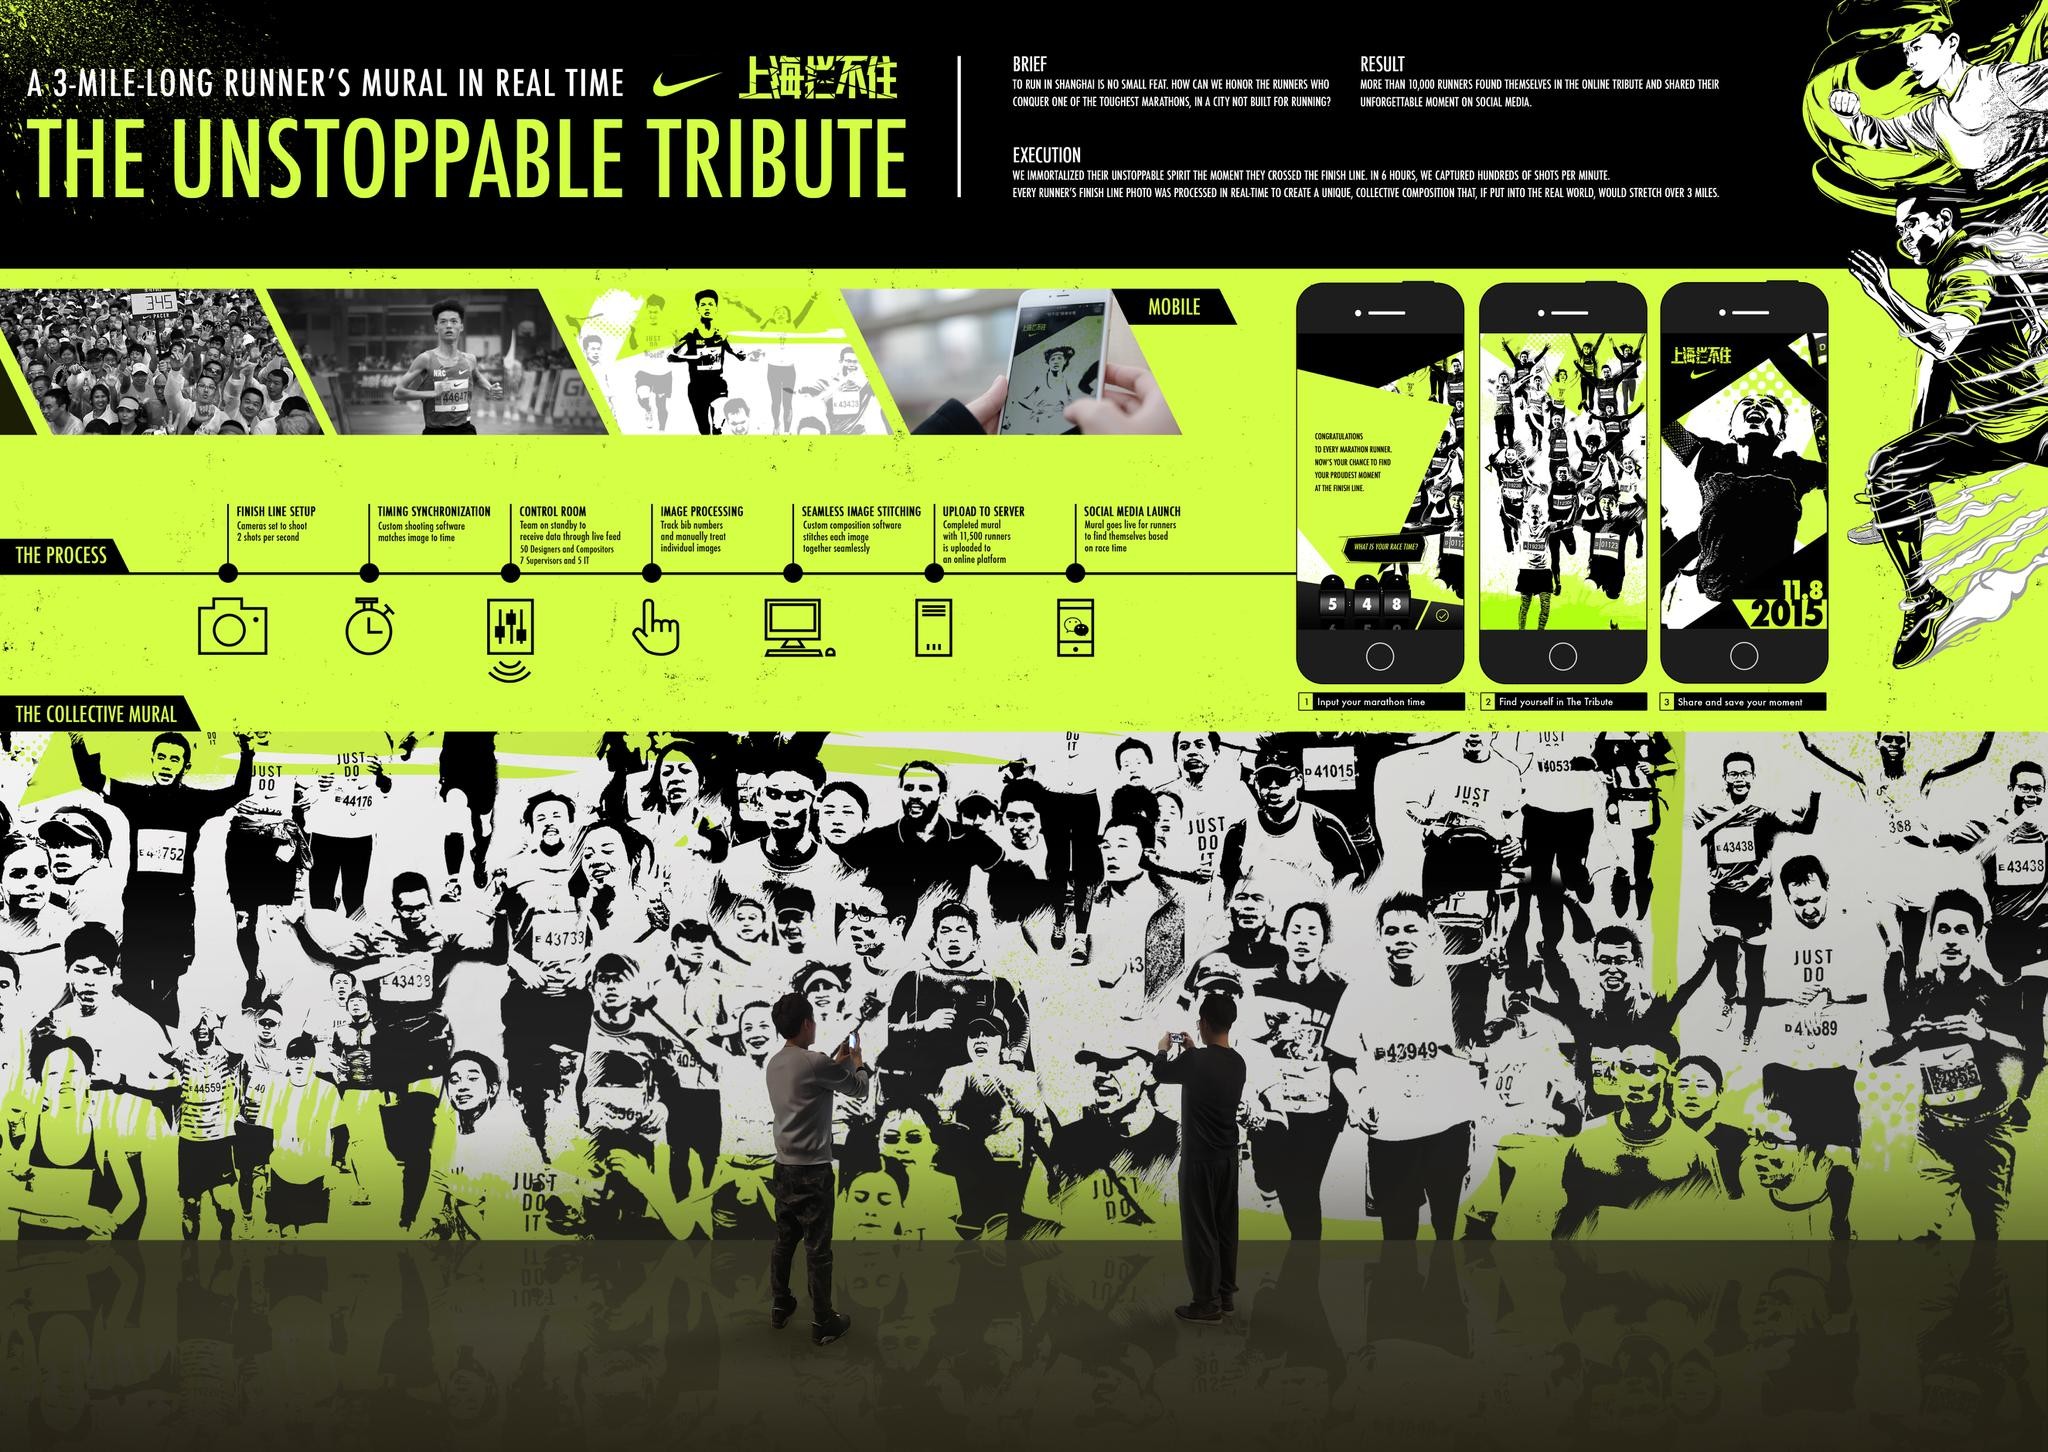 THE UNSTOPPABLE TRIBUTE